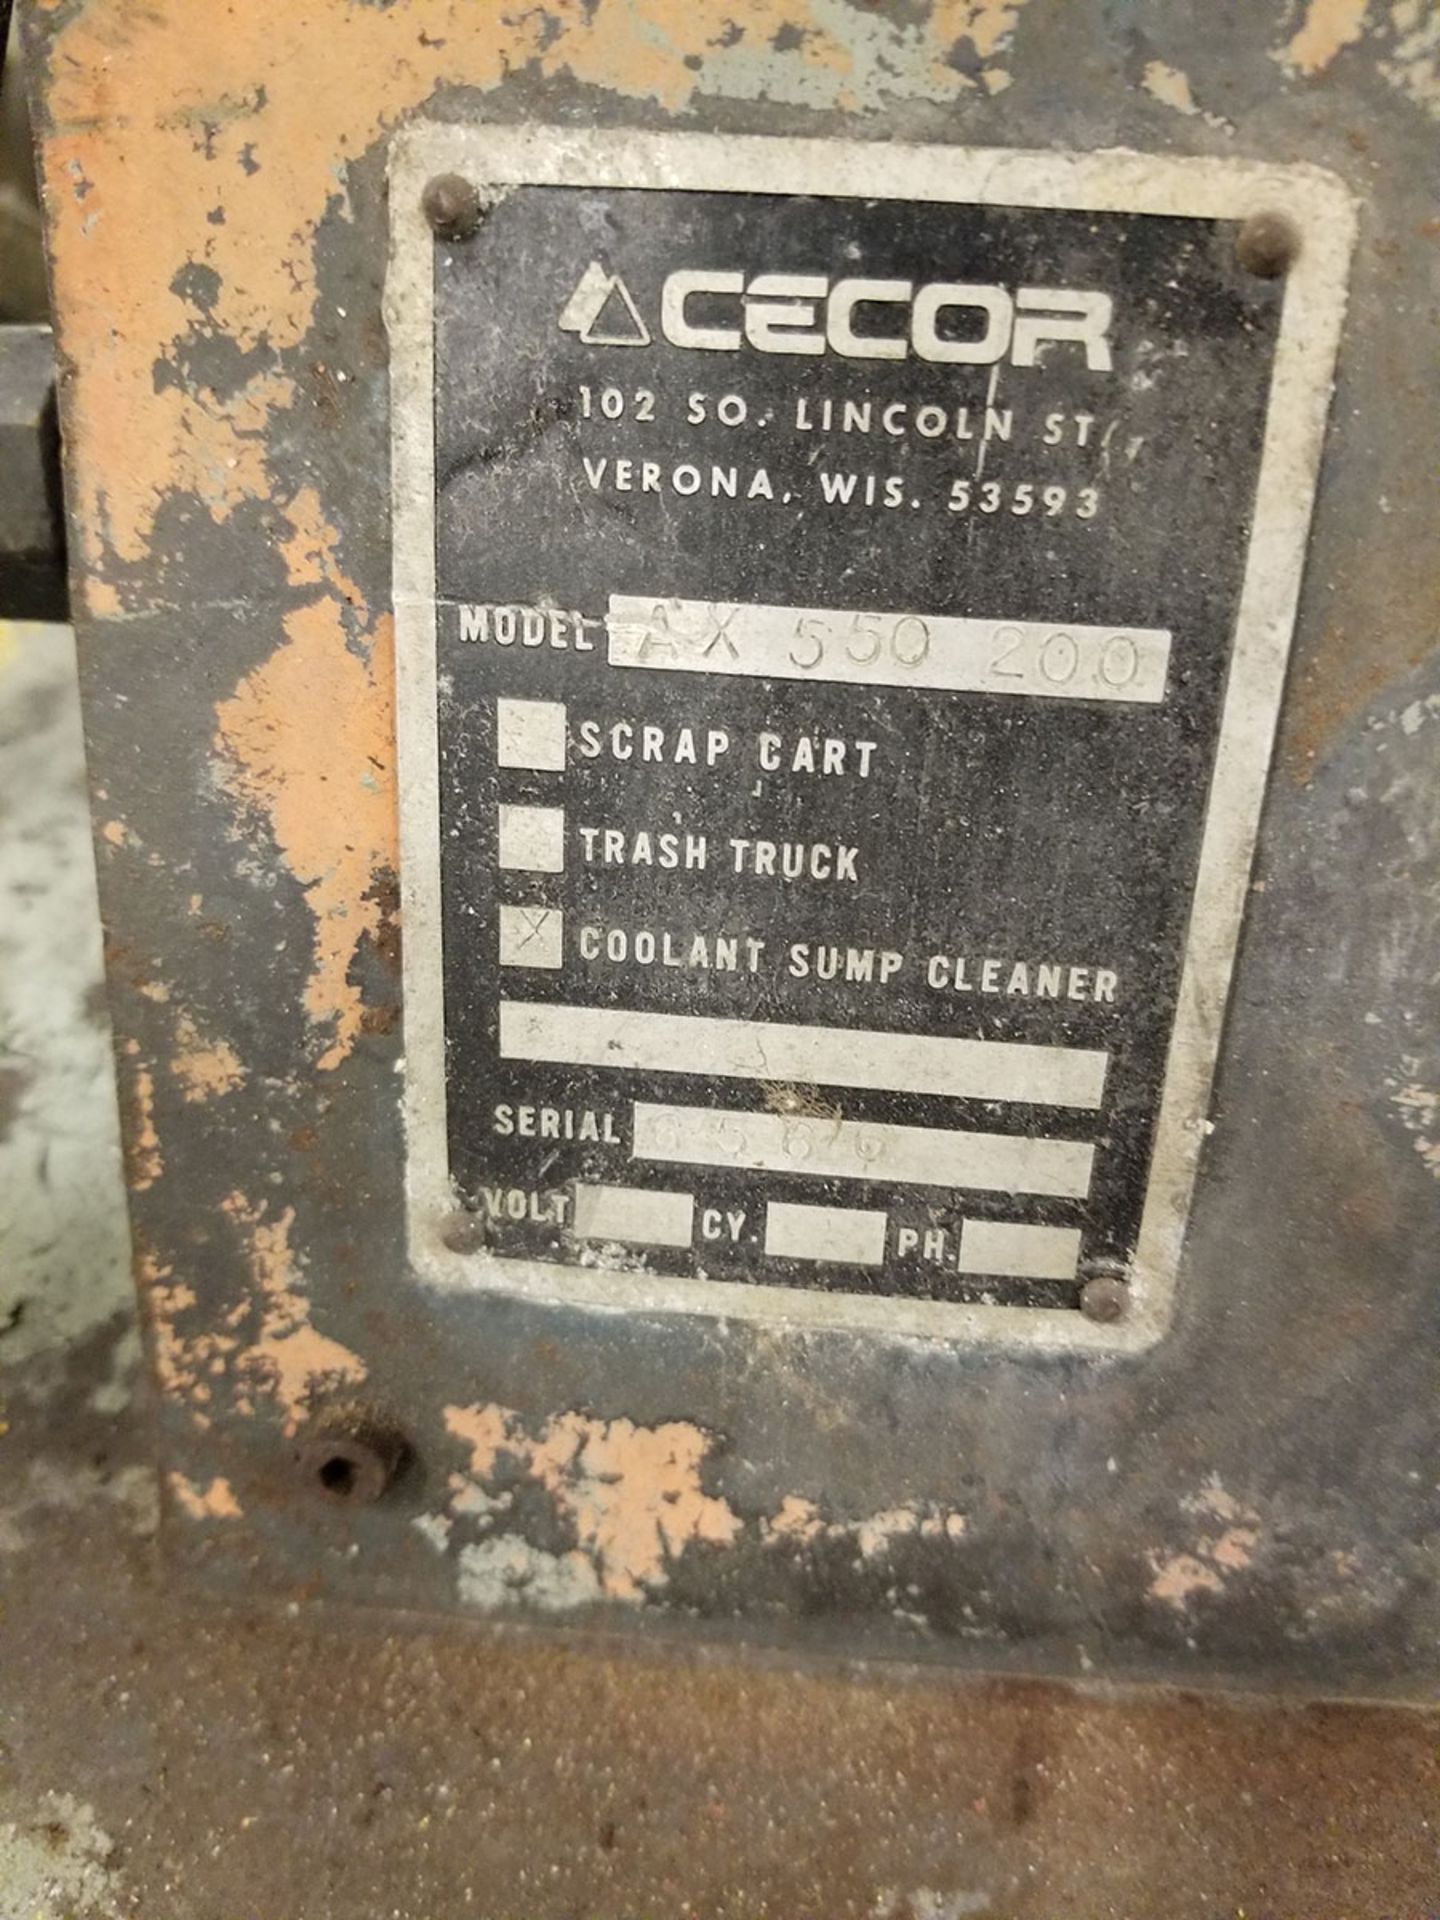 CECOR PORTABLE COOLANT SUMP CLEANER, MODEL AX550-200, 200-GALLON & VERTICAL MIXING TANK ASSEMBLY - Image 4 of 5